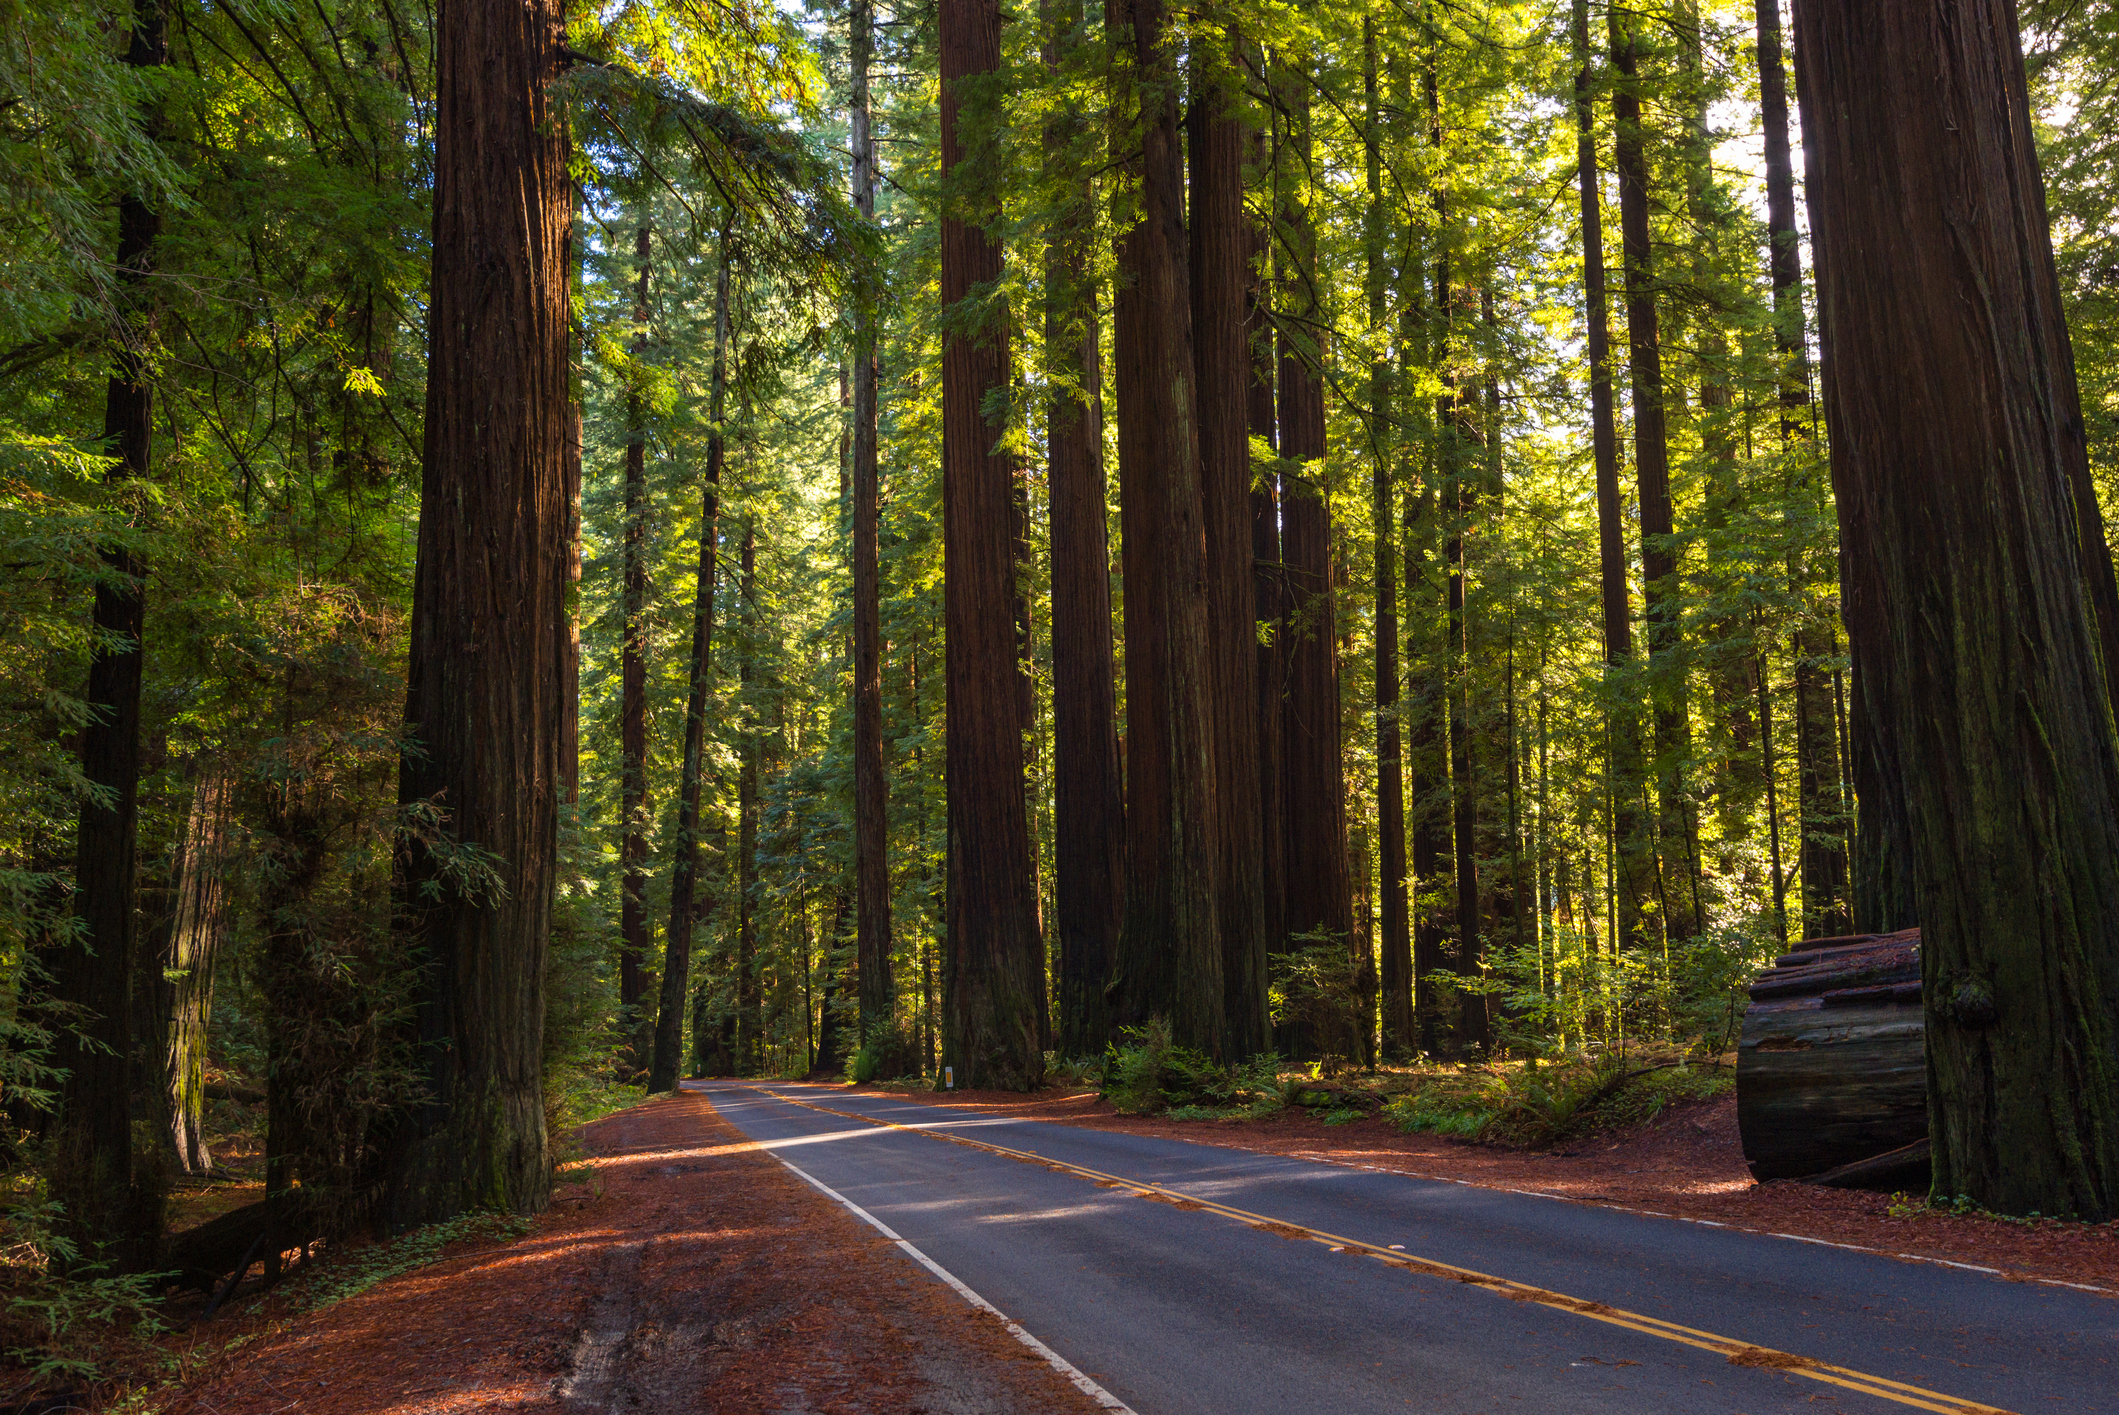 Scenic highway in Northern California running through Redwoods State Park